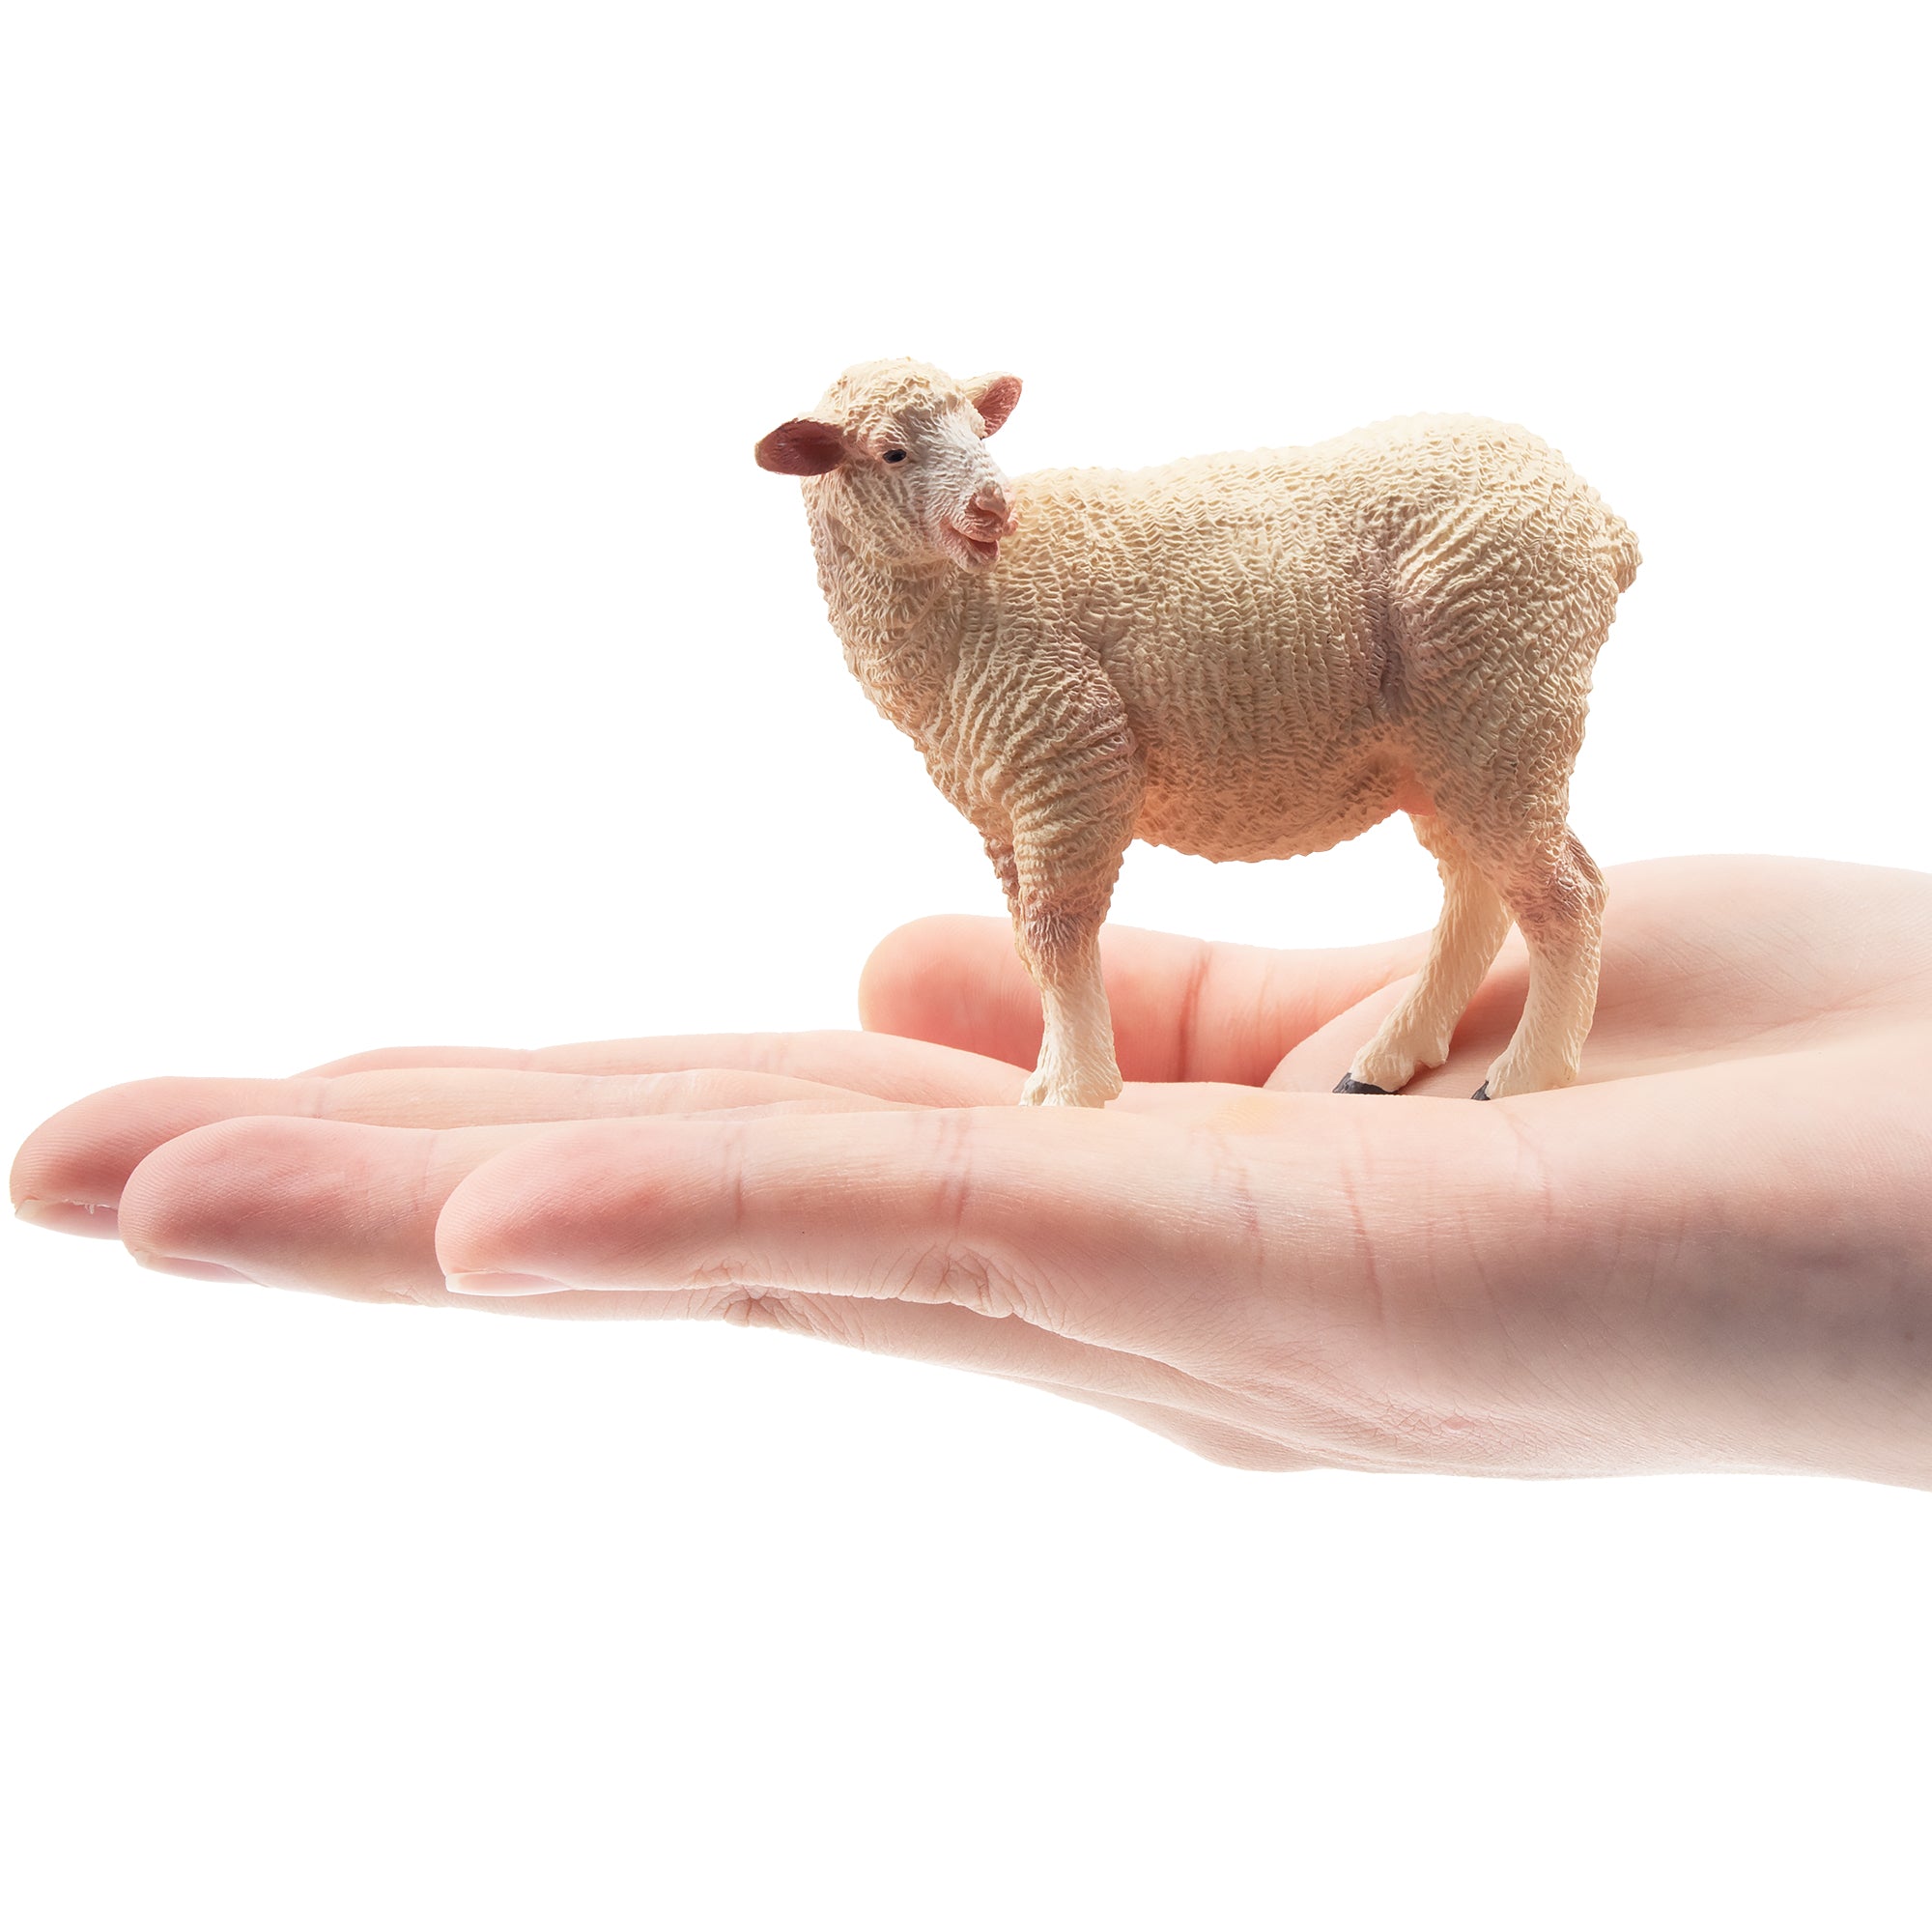 Toymany Standing Light-Haired Ewe Figurine Toy-on hand